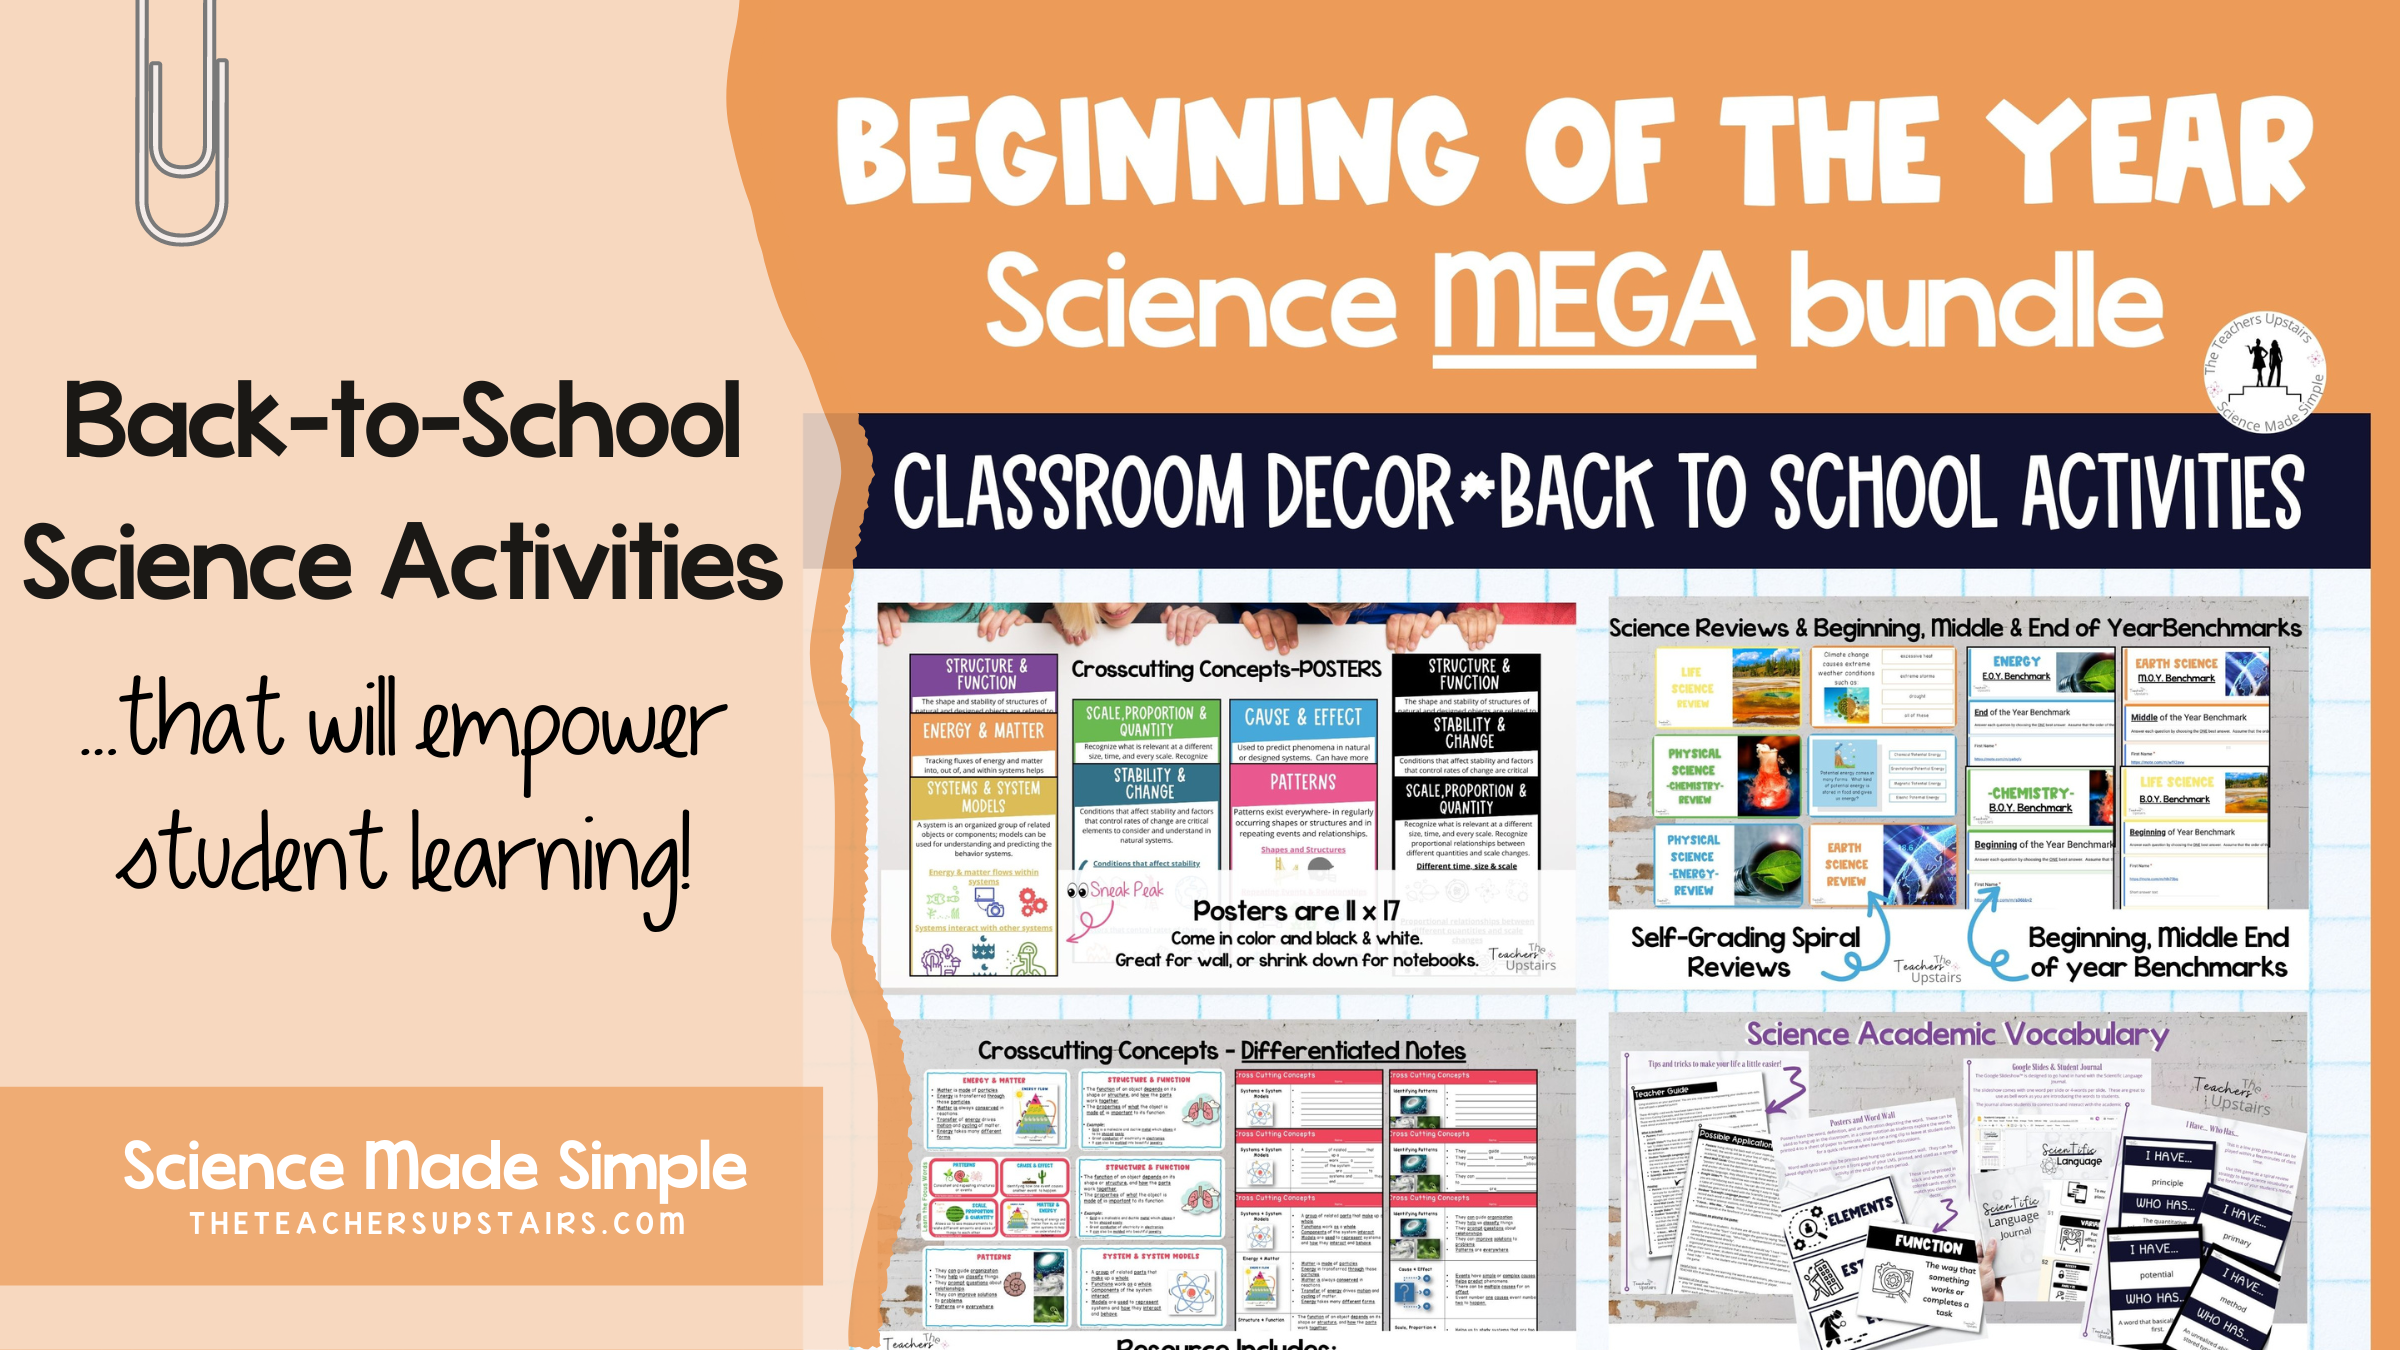 Shows four images included in the 16 resource back to school science activities